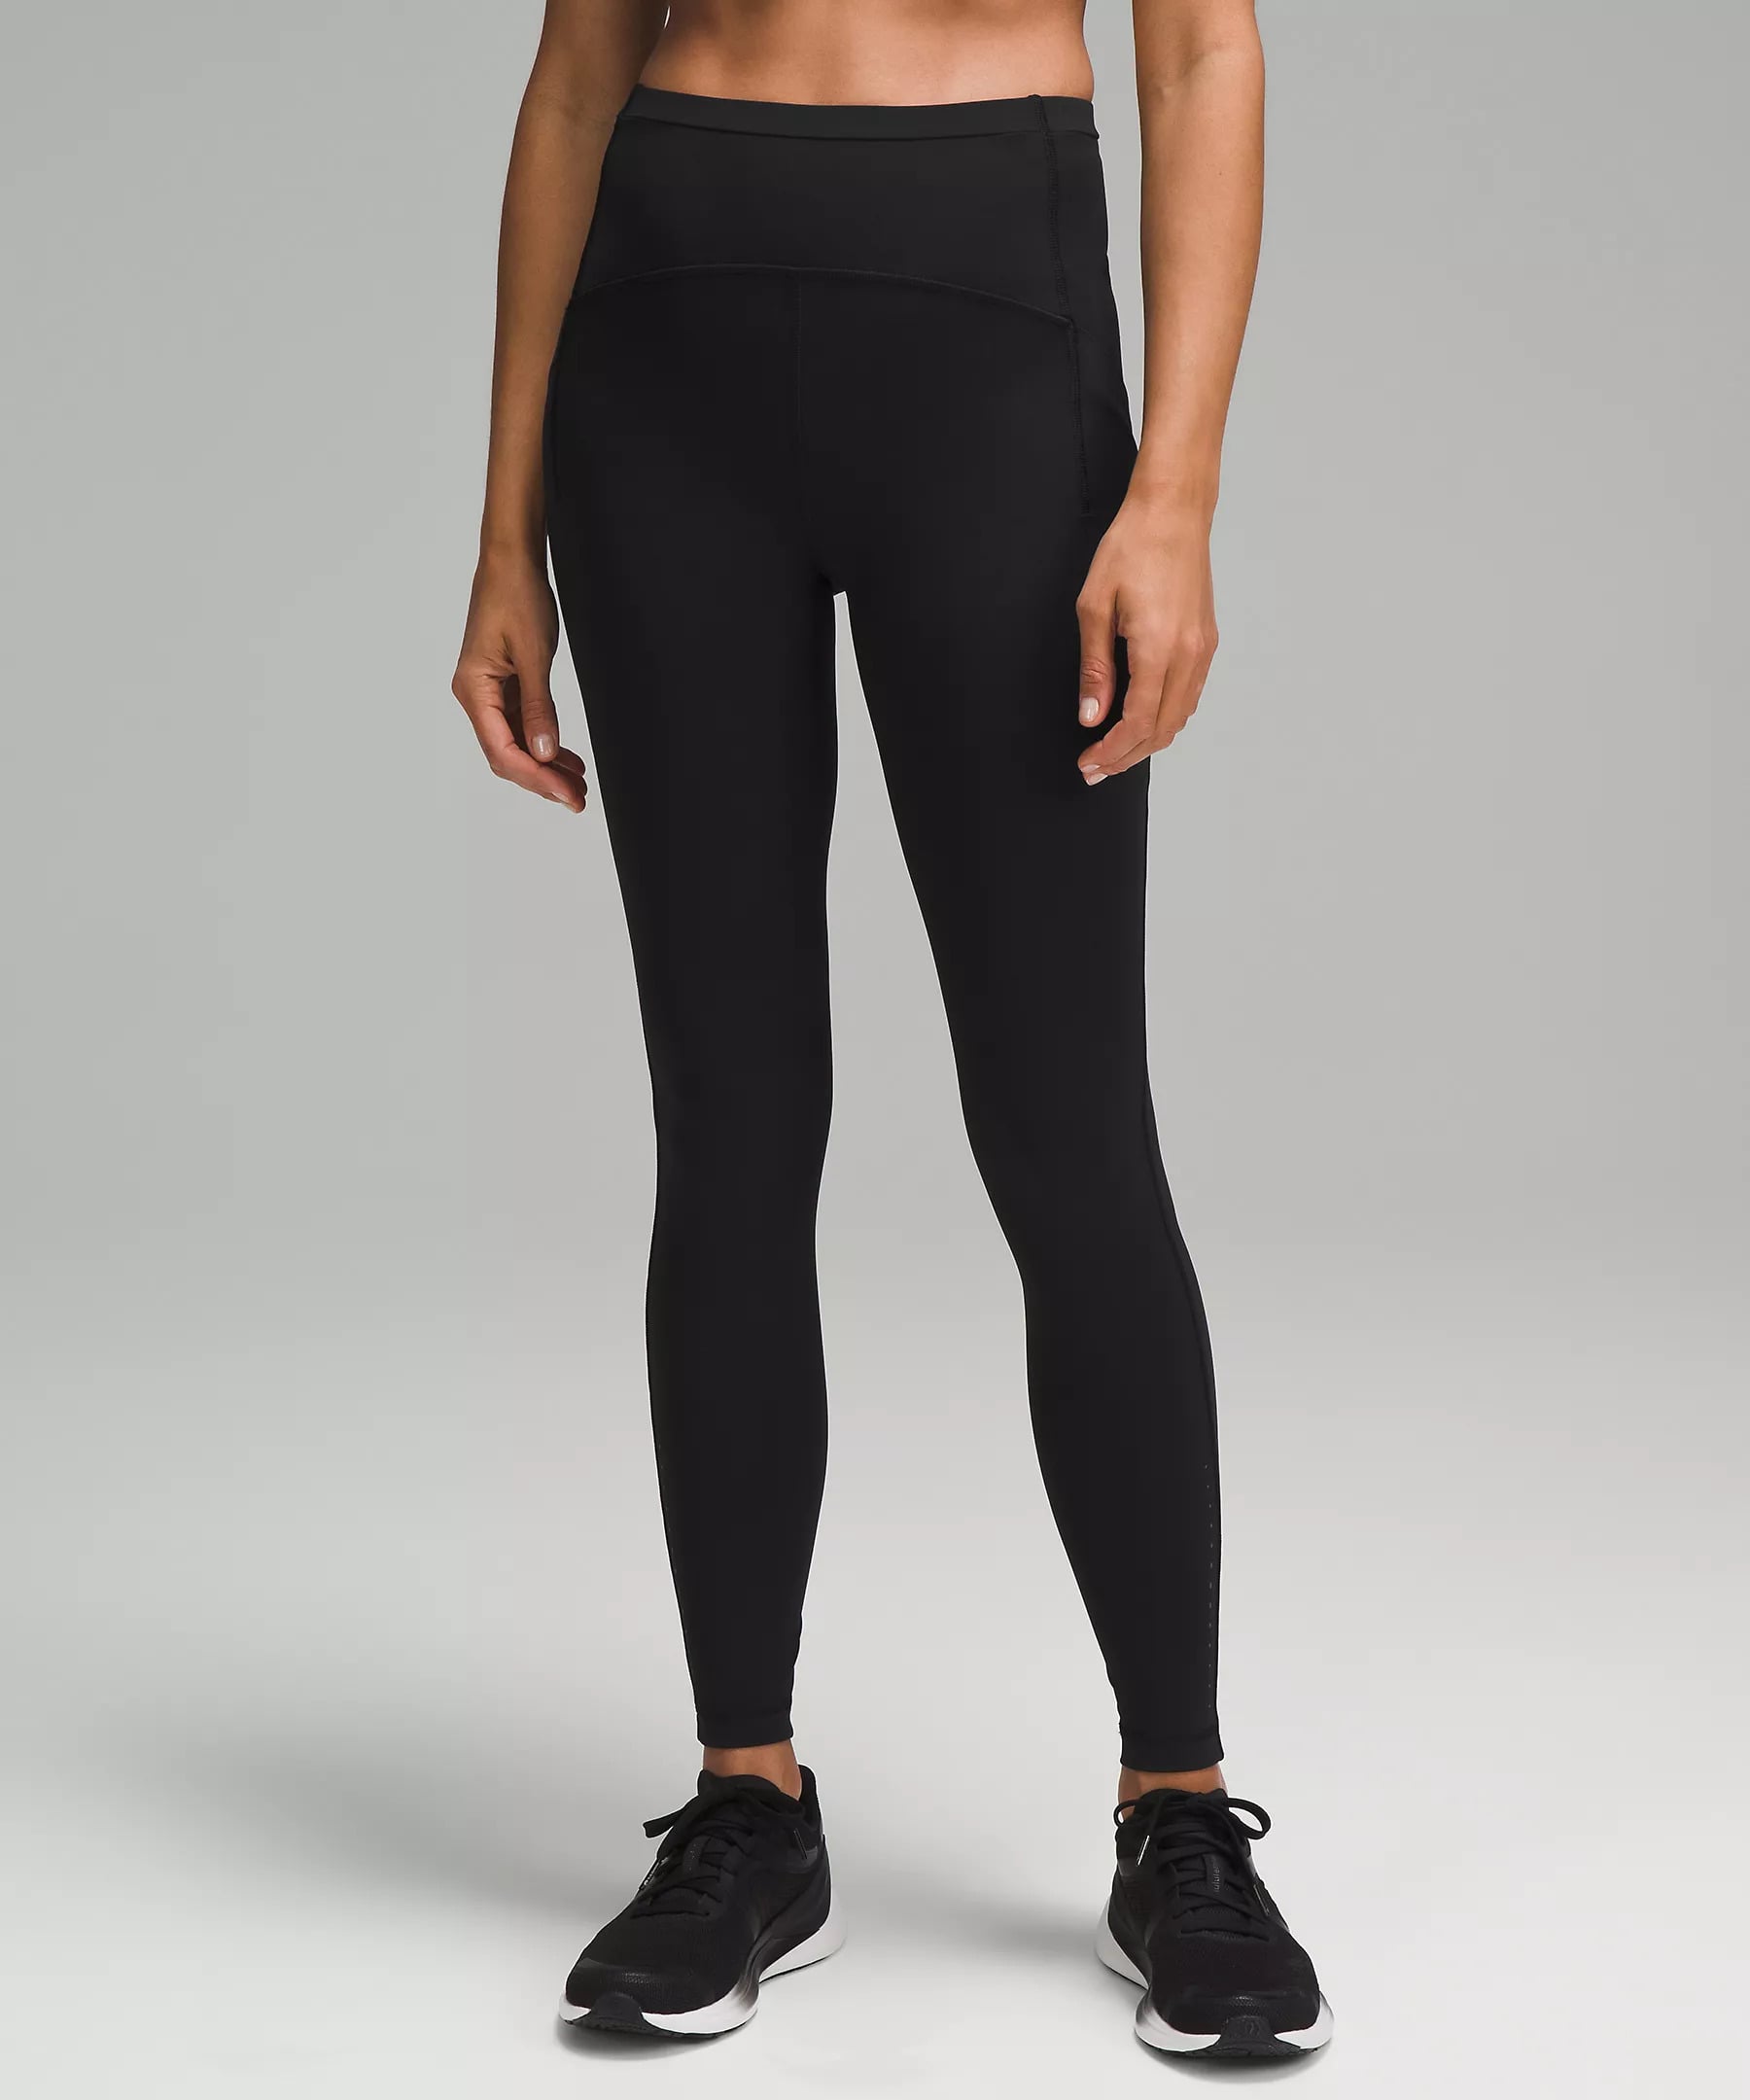 Fitness Gear 101: The Ultimate Guide To Shopping For Activewear Online